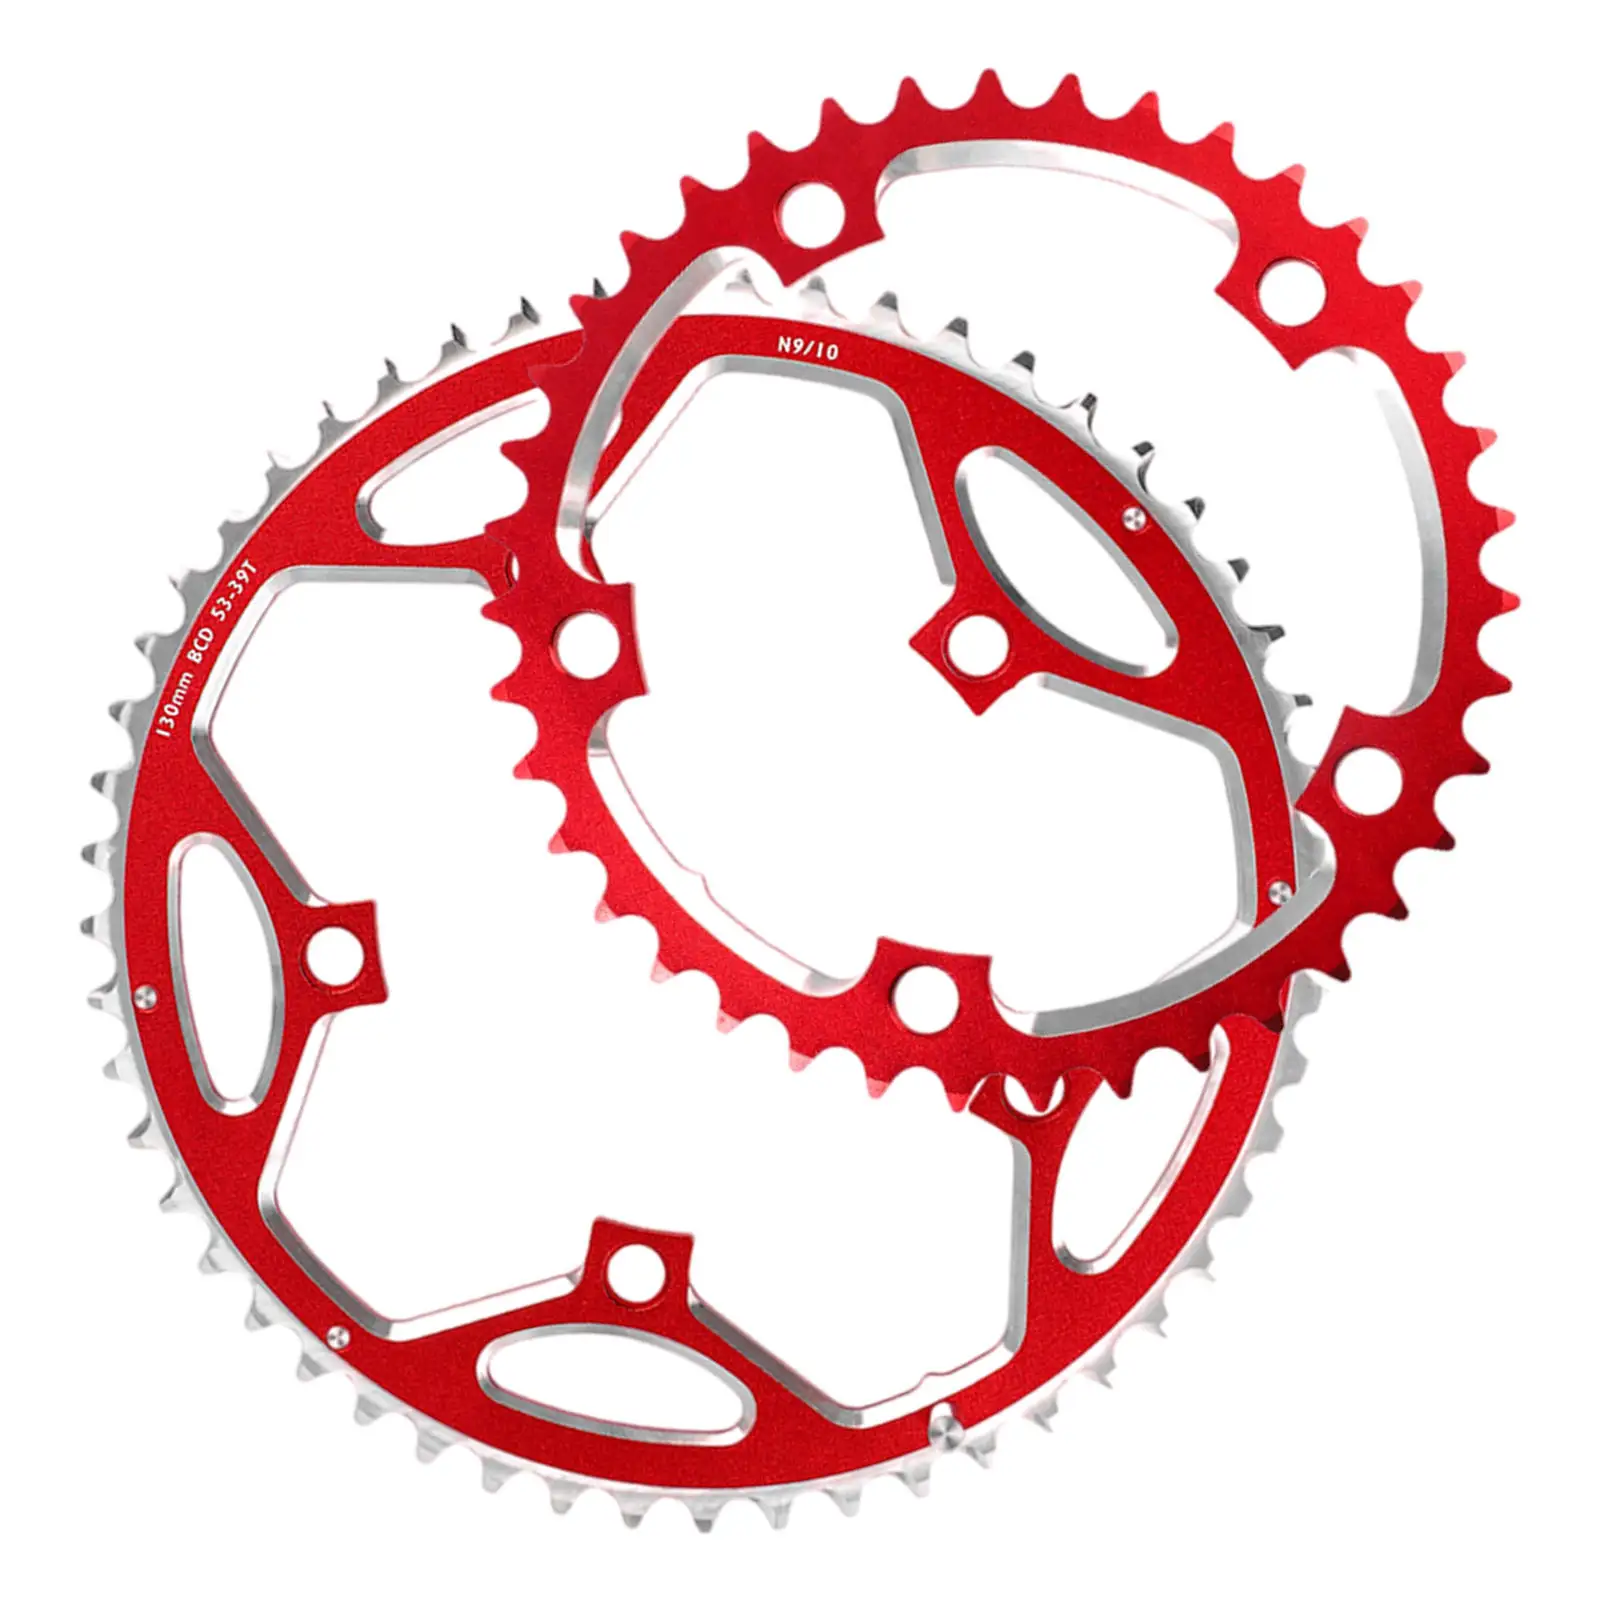 Road Bike Chainring Aluminum Alloy 130mm BCD Round Bicycle Chainring 39-53T for 8-11 Speed Parts Supplies Repair